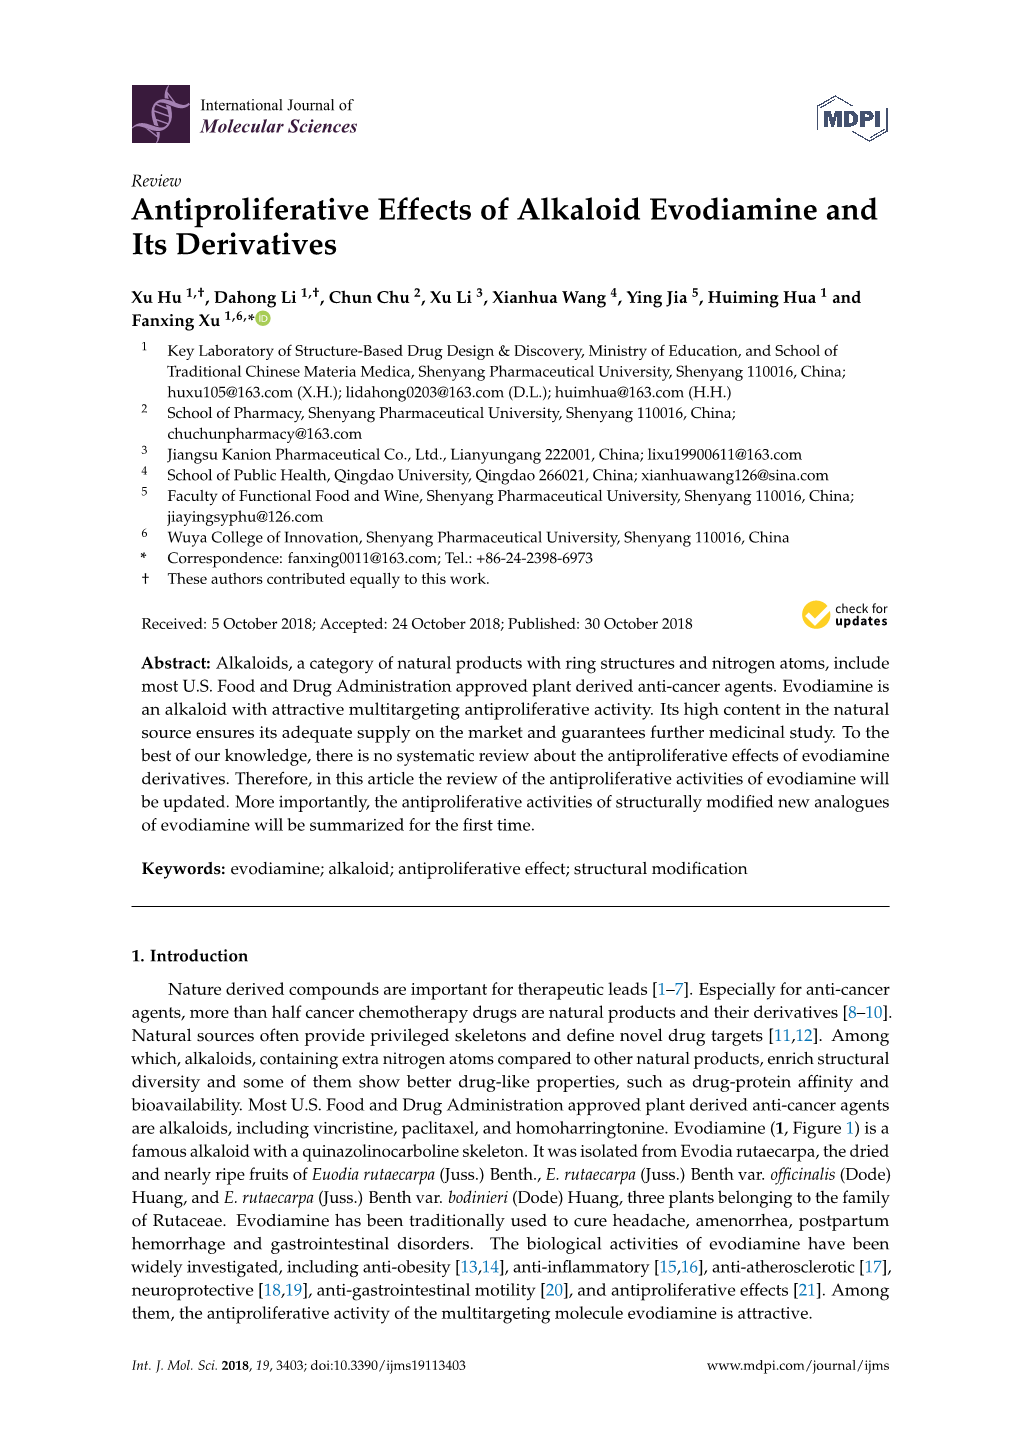 Antiproliferative Effects of Alkaloid Evodiamine and Its Derivatives